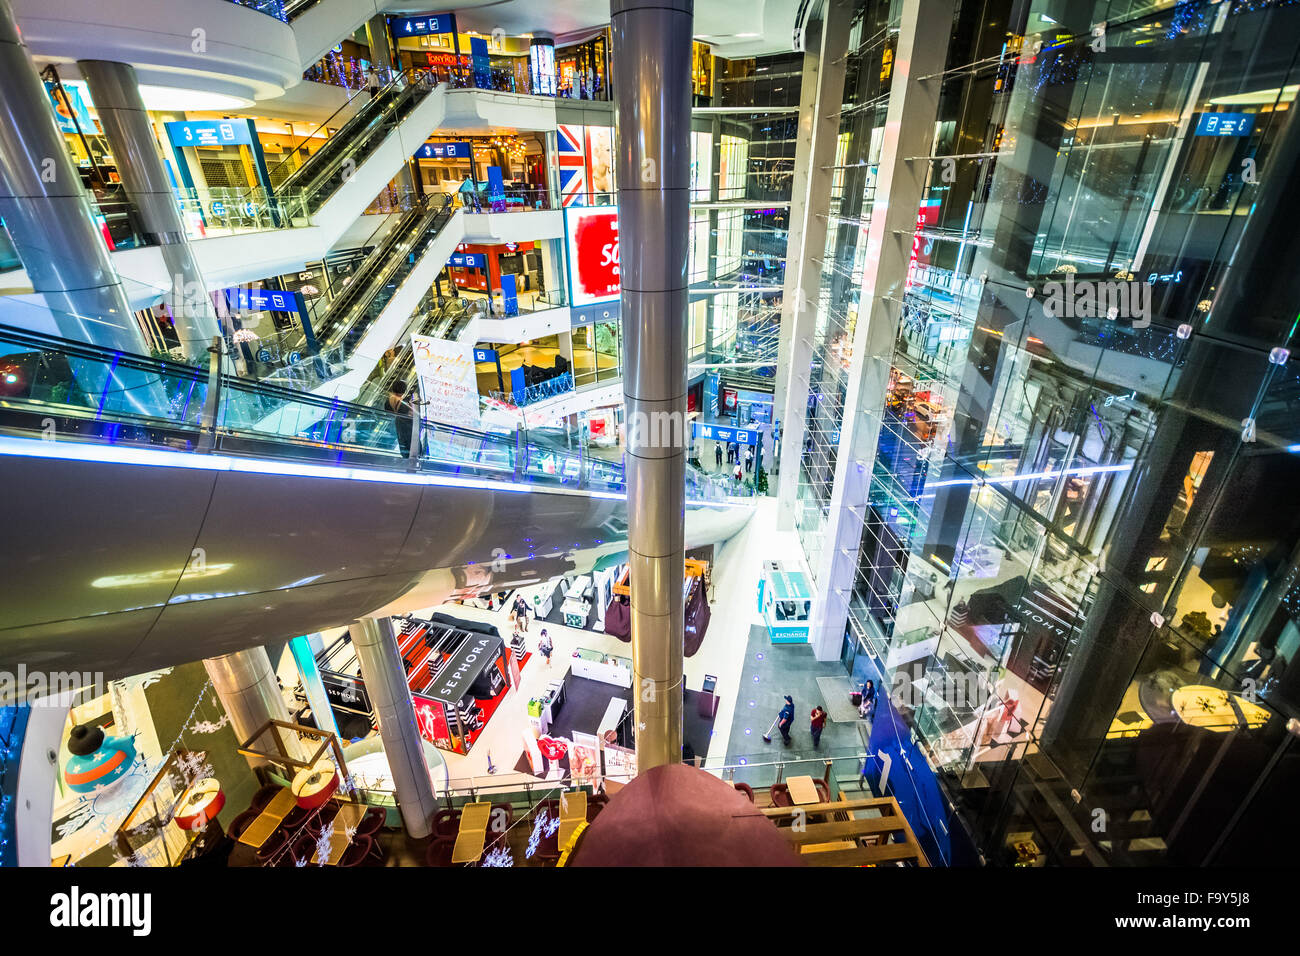 Bangkok's Mall Culture Includes More than Just Shopping [PHOTOS] – WWD